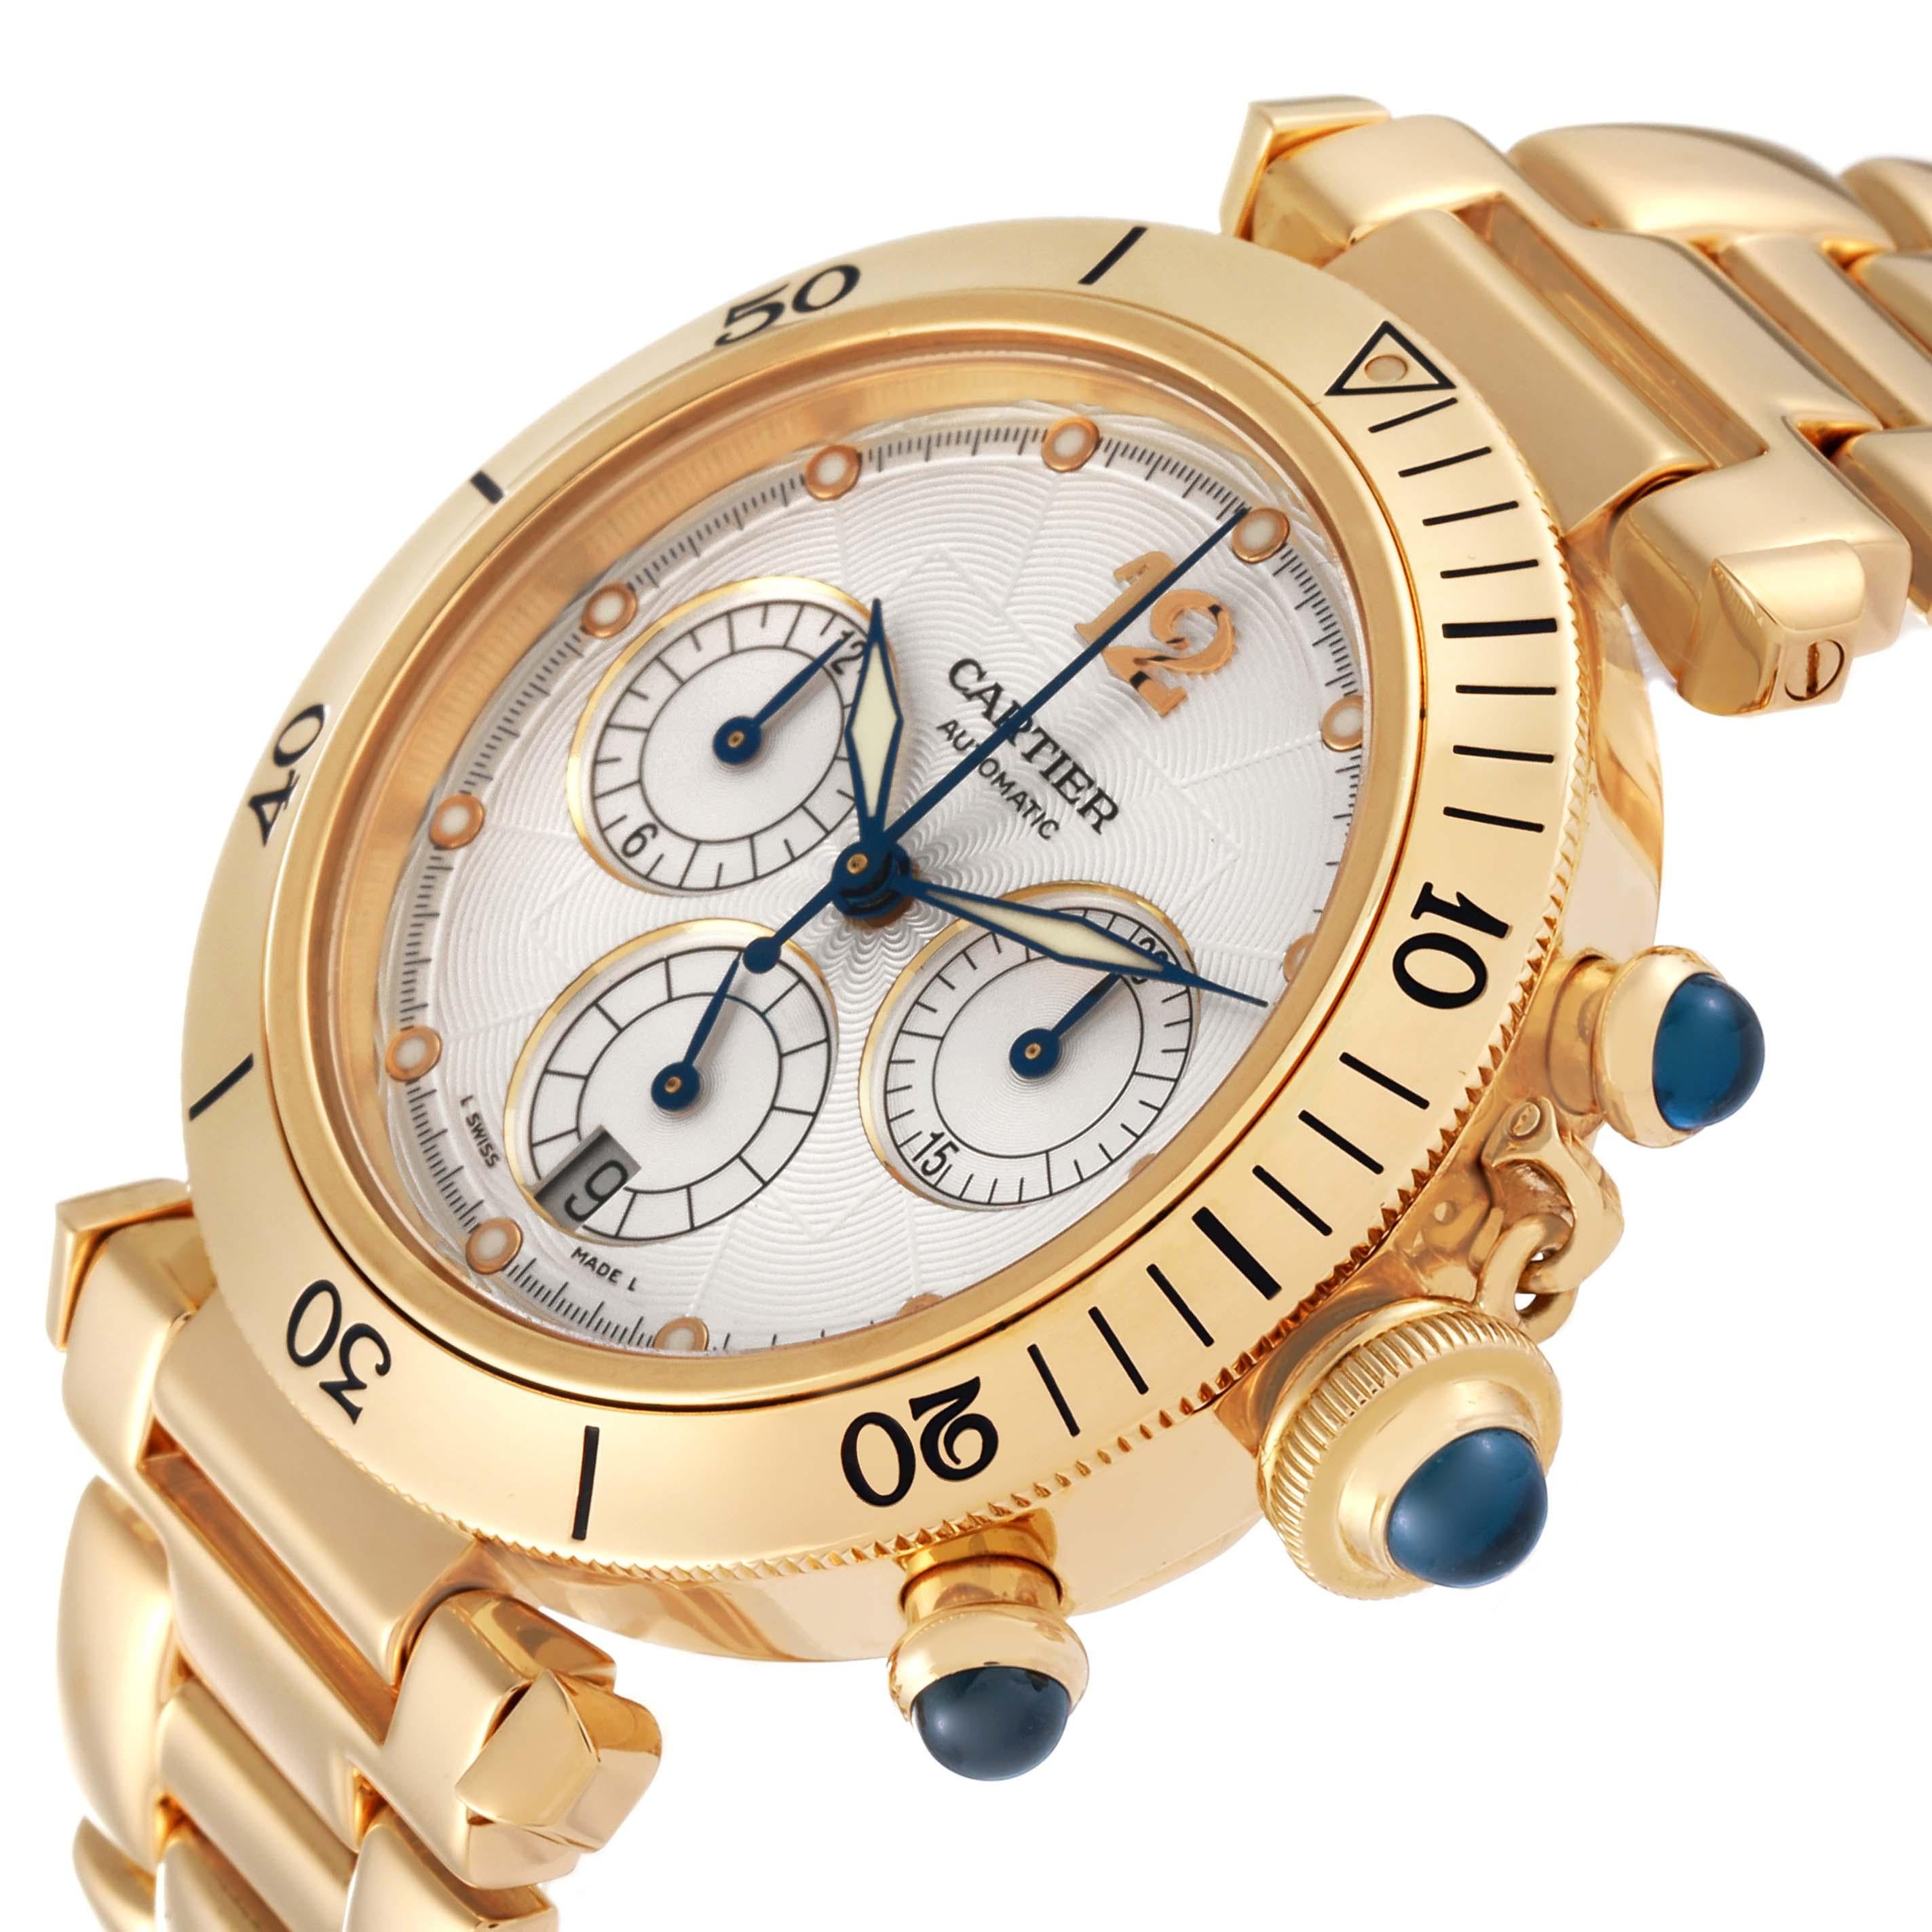 Cartier Pasha Chronograph Yellow Gold Mens Watch 2111. Automatic self-winding chronograph movement. Round 18K yellow gold case 38.5 mm in diameter. Screw down crown protector and chronograph pushers set with a blue sapphire cabochon. Exhibition